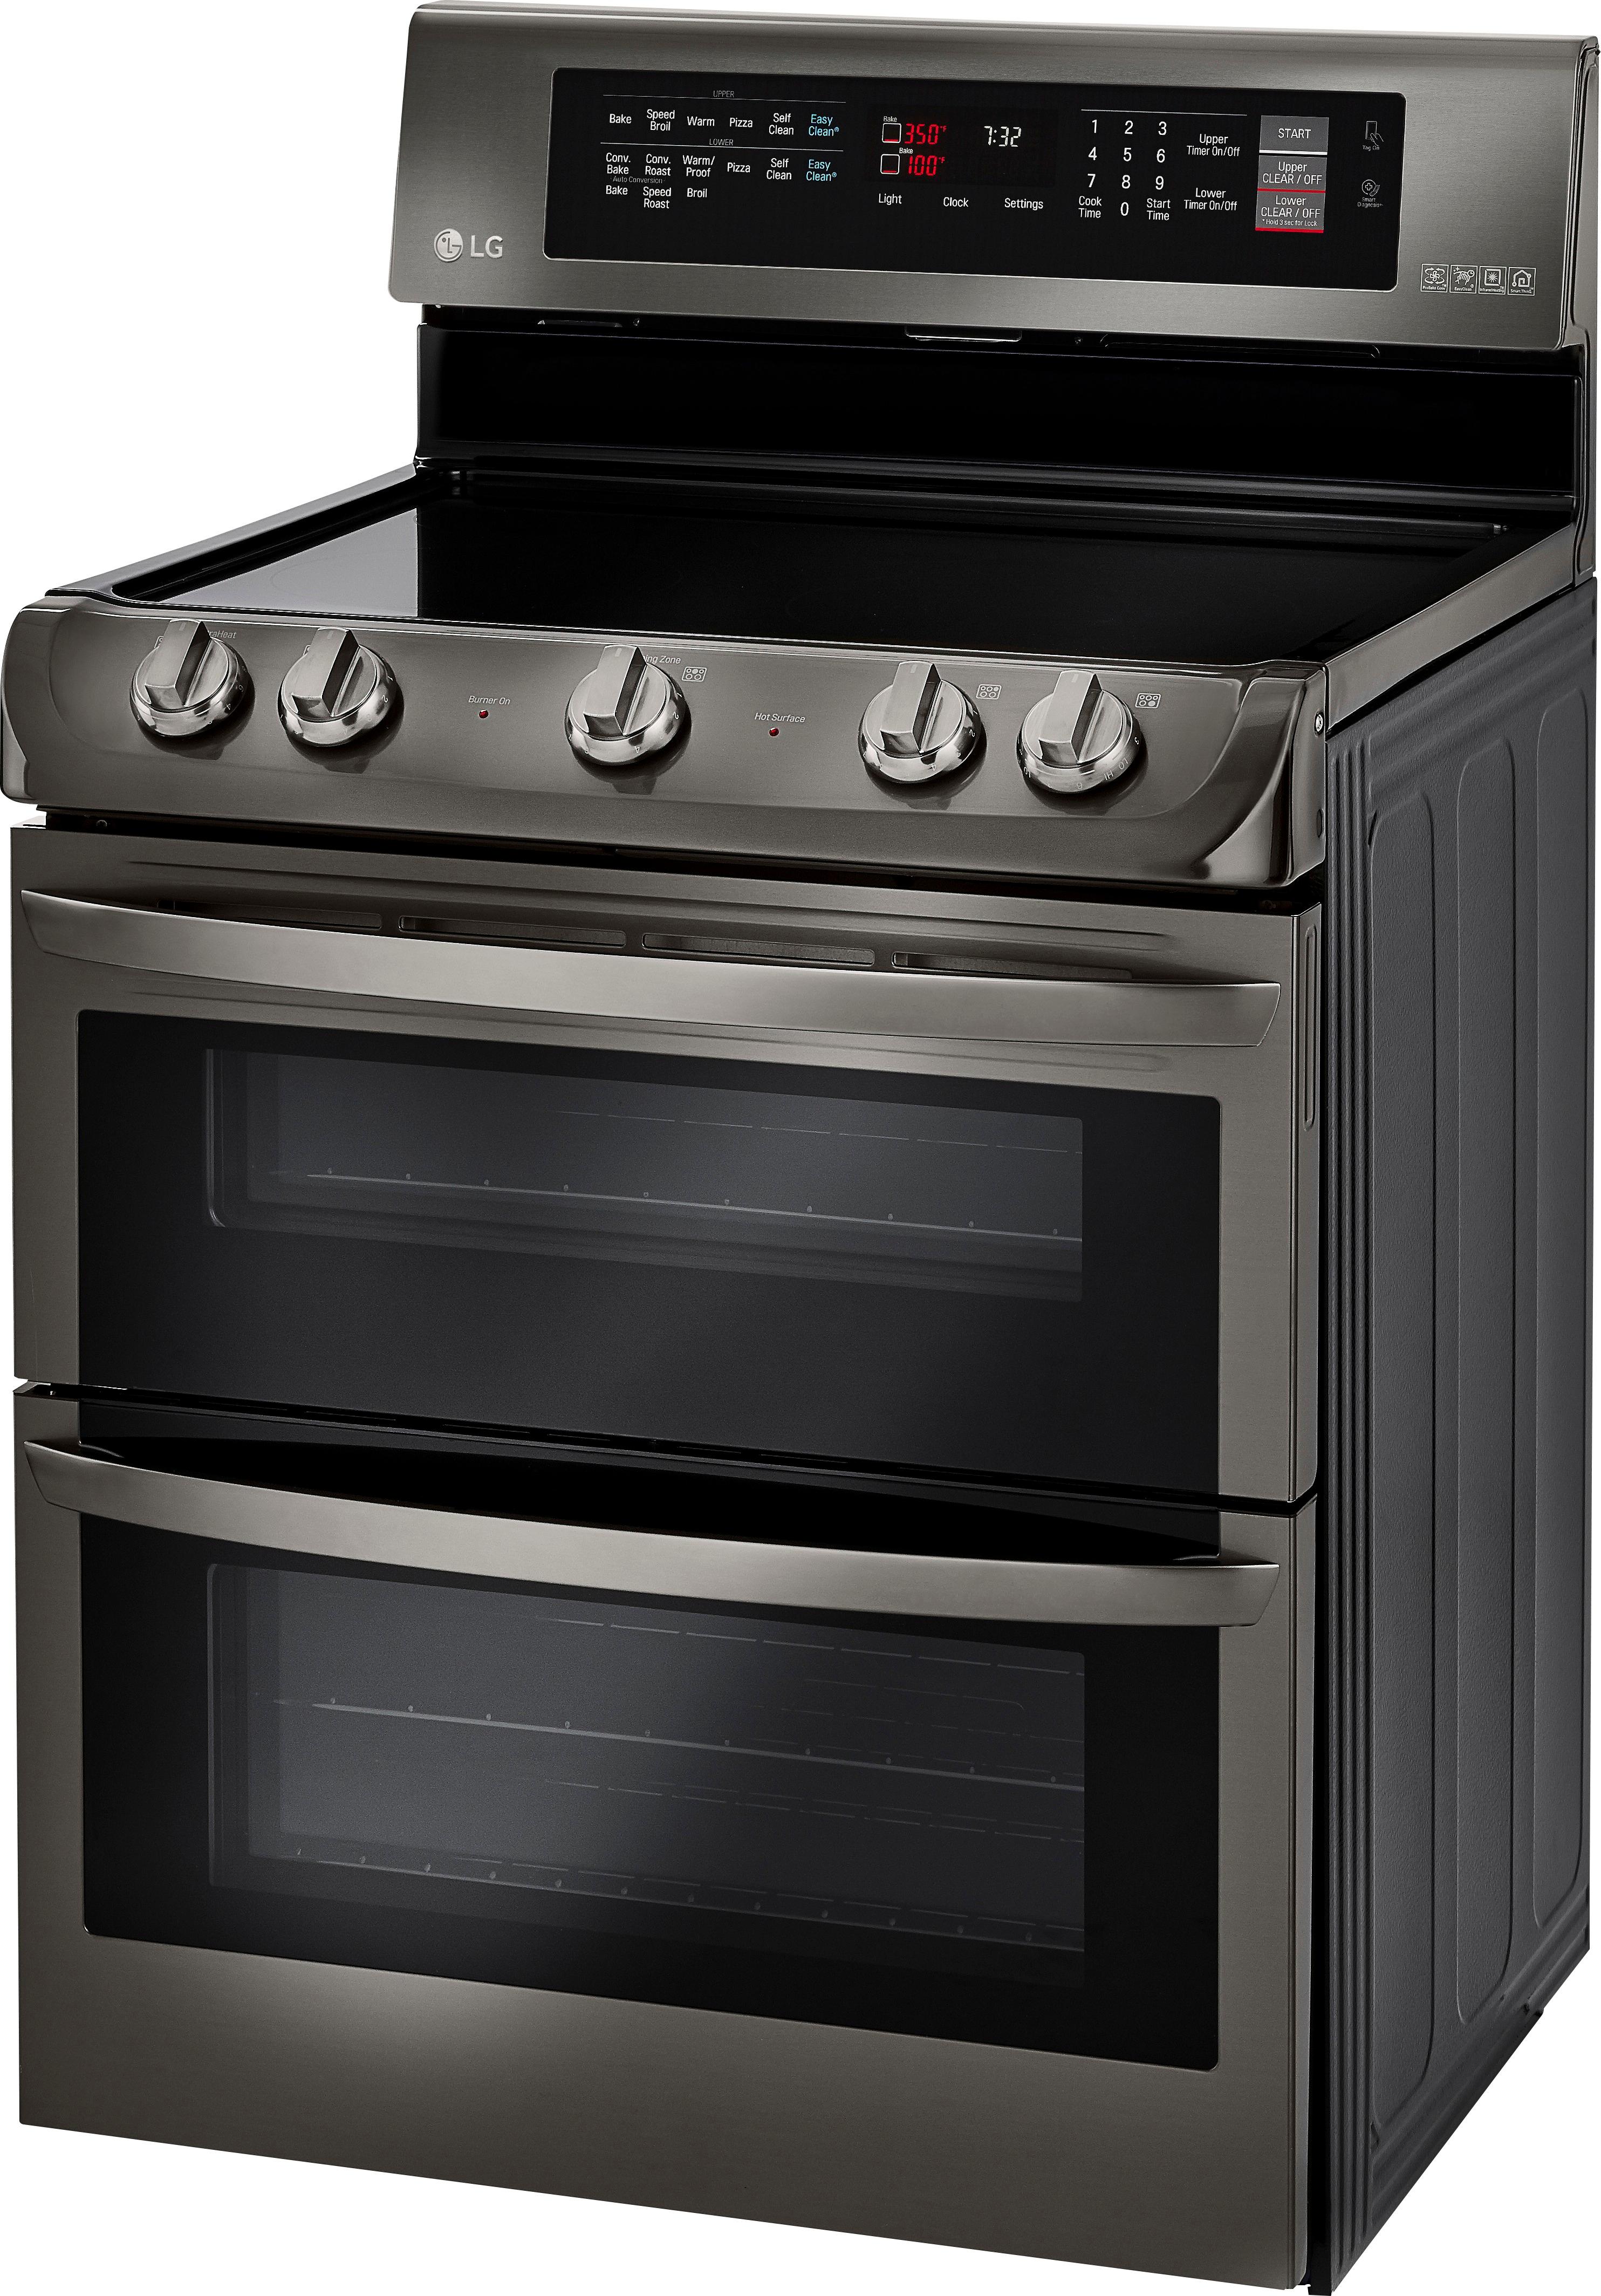 Black Stainless Steel Double Oven Electric Range